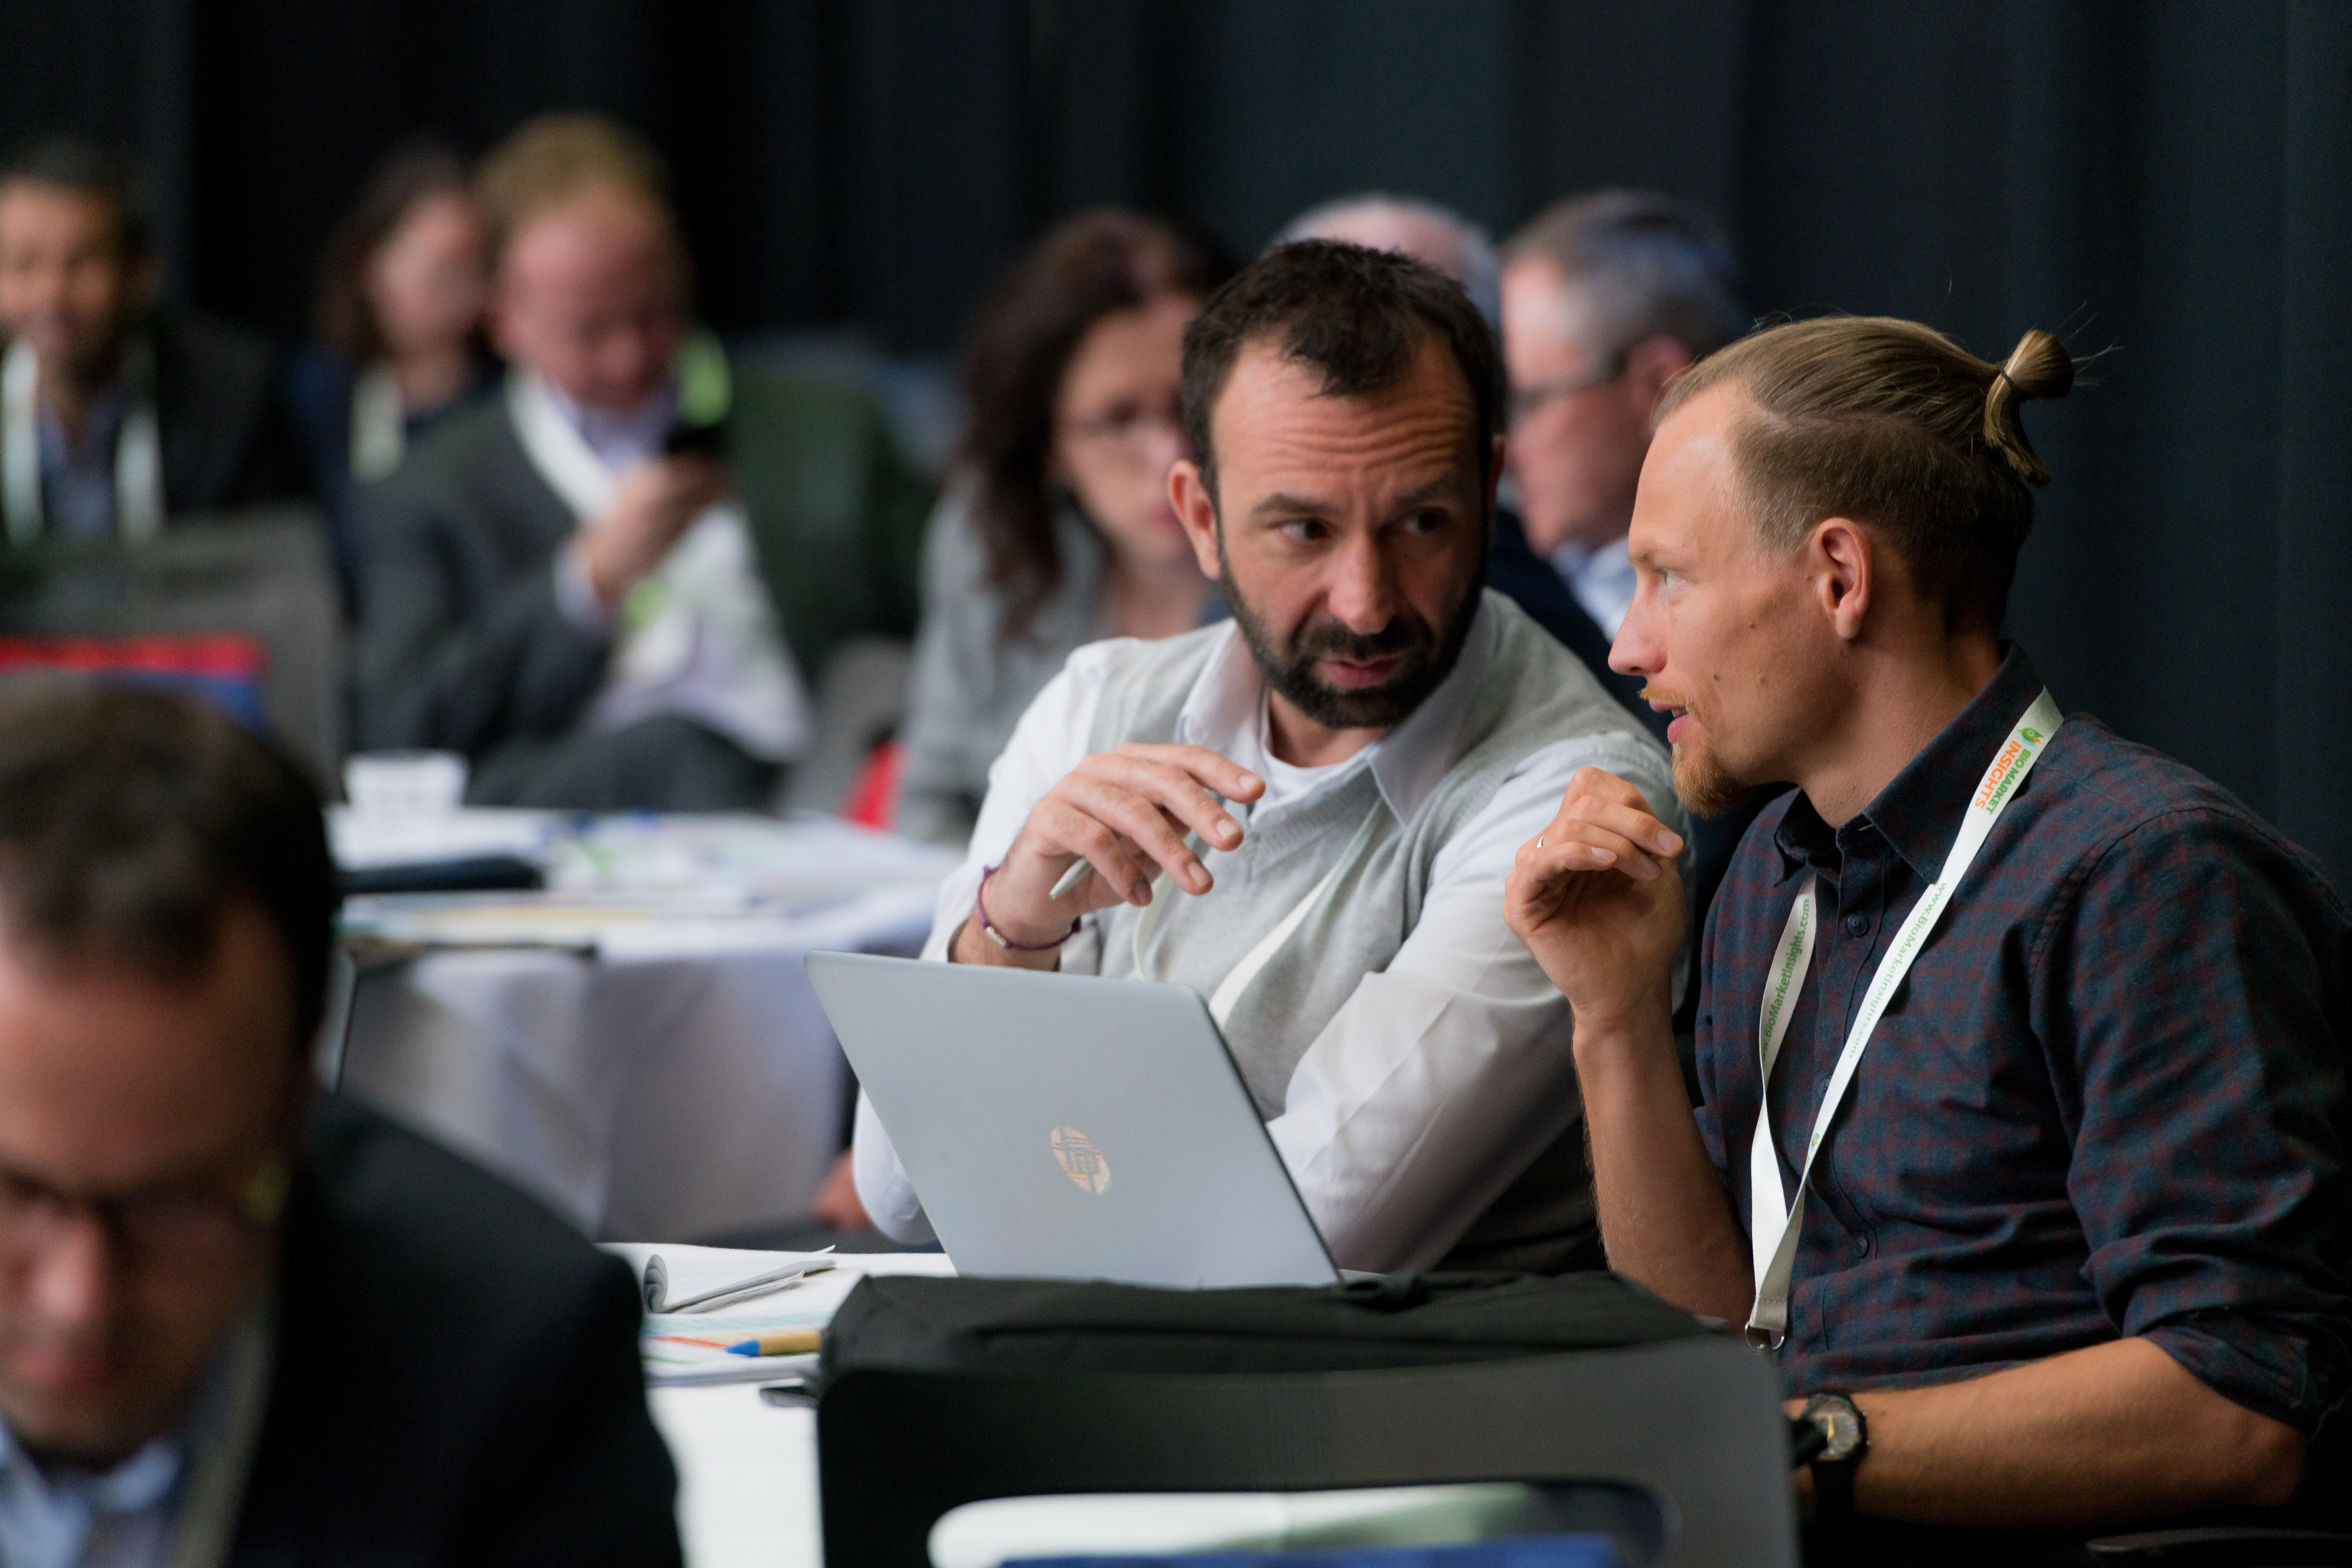 12 Expert Insights from Day One of World Bio Markets 2019